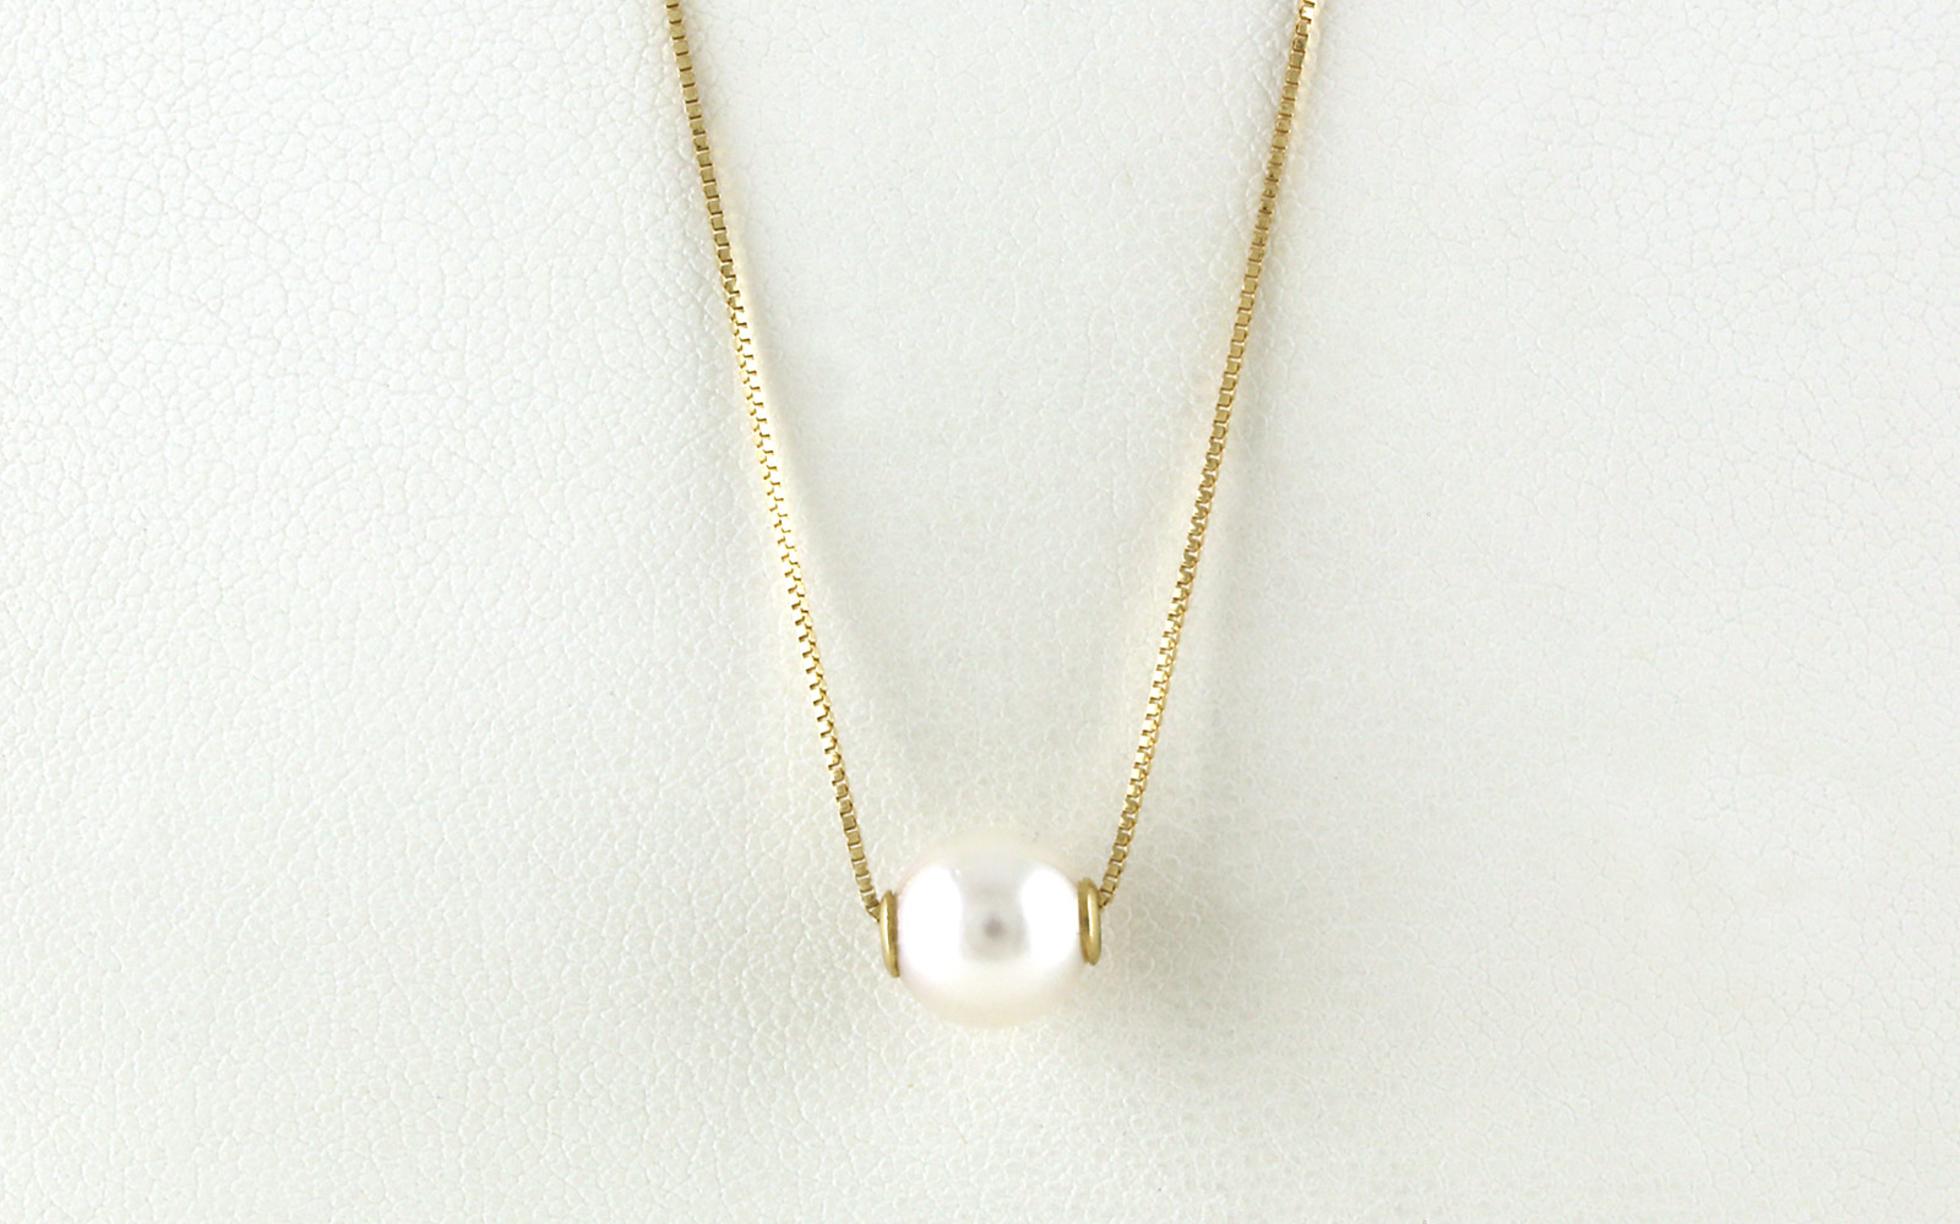 Slide-style Pearl Necklace in Yellow Gold